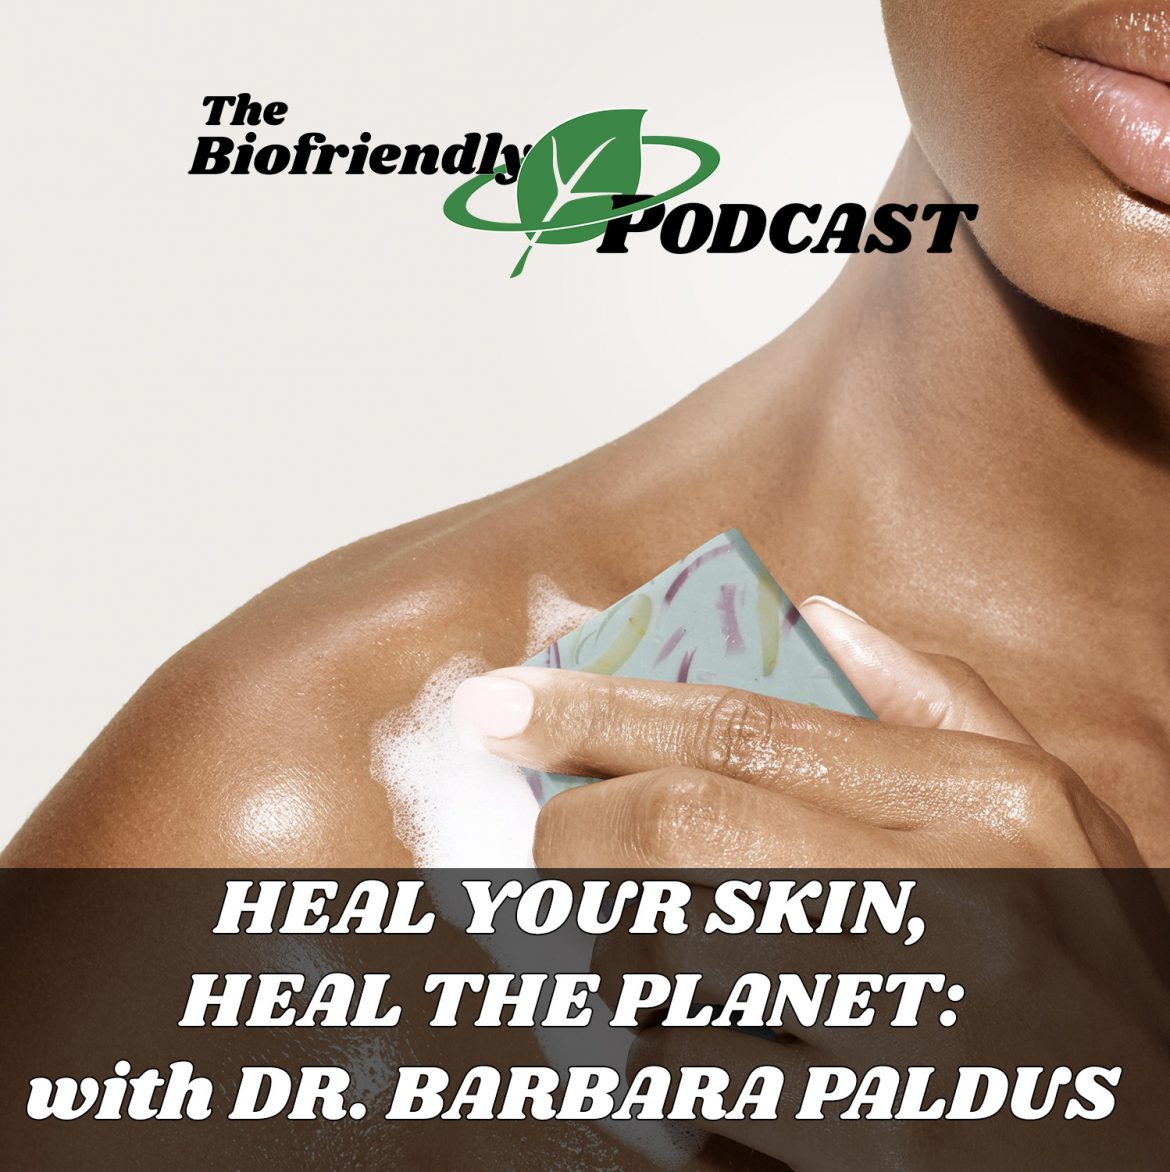 Heal Your Skin, Heal the Planet: with Dr. Barbara Paldus